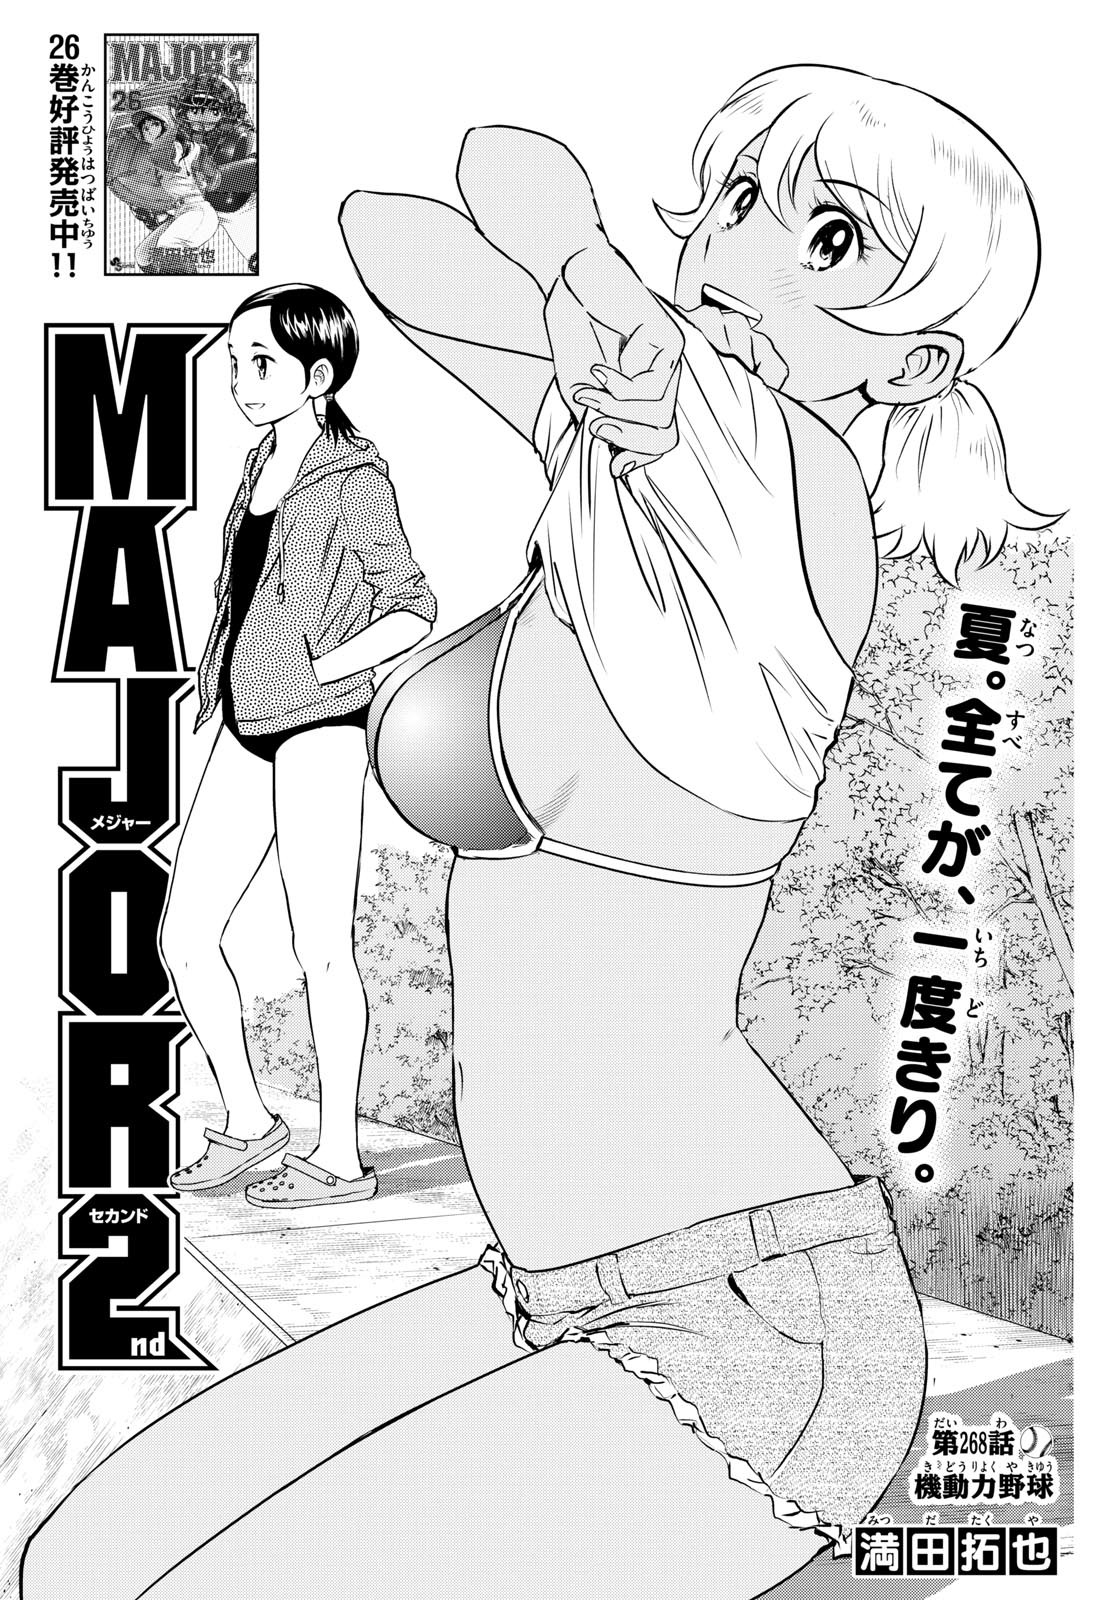 Major 2nd - メジャーセカンド - Chapter 268 - Page 1